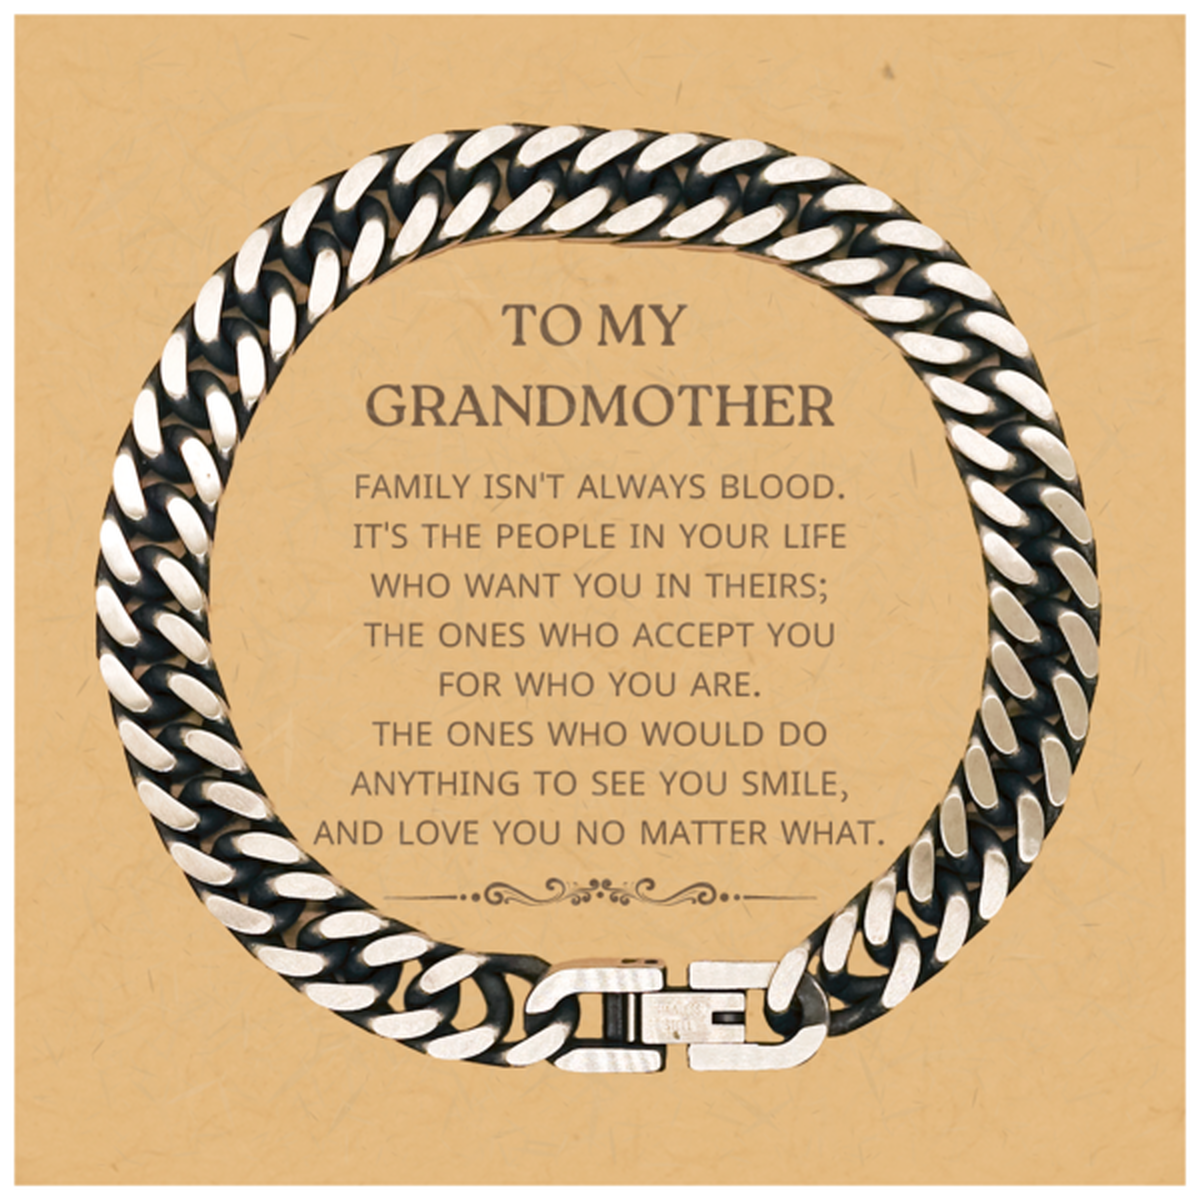 To My Grandmother Gifts, Family isn't always blood, Grandmother Cuban Link Chain Bracelet, Birthday Christmas Unique Present For Grandmother